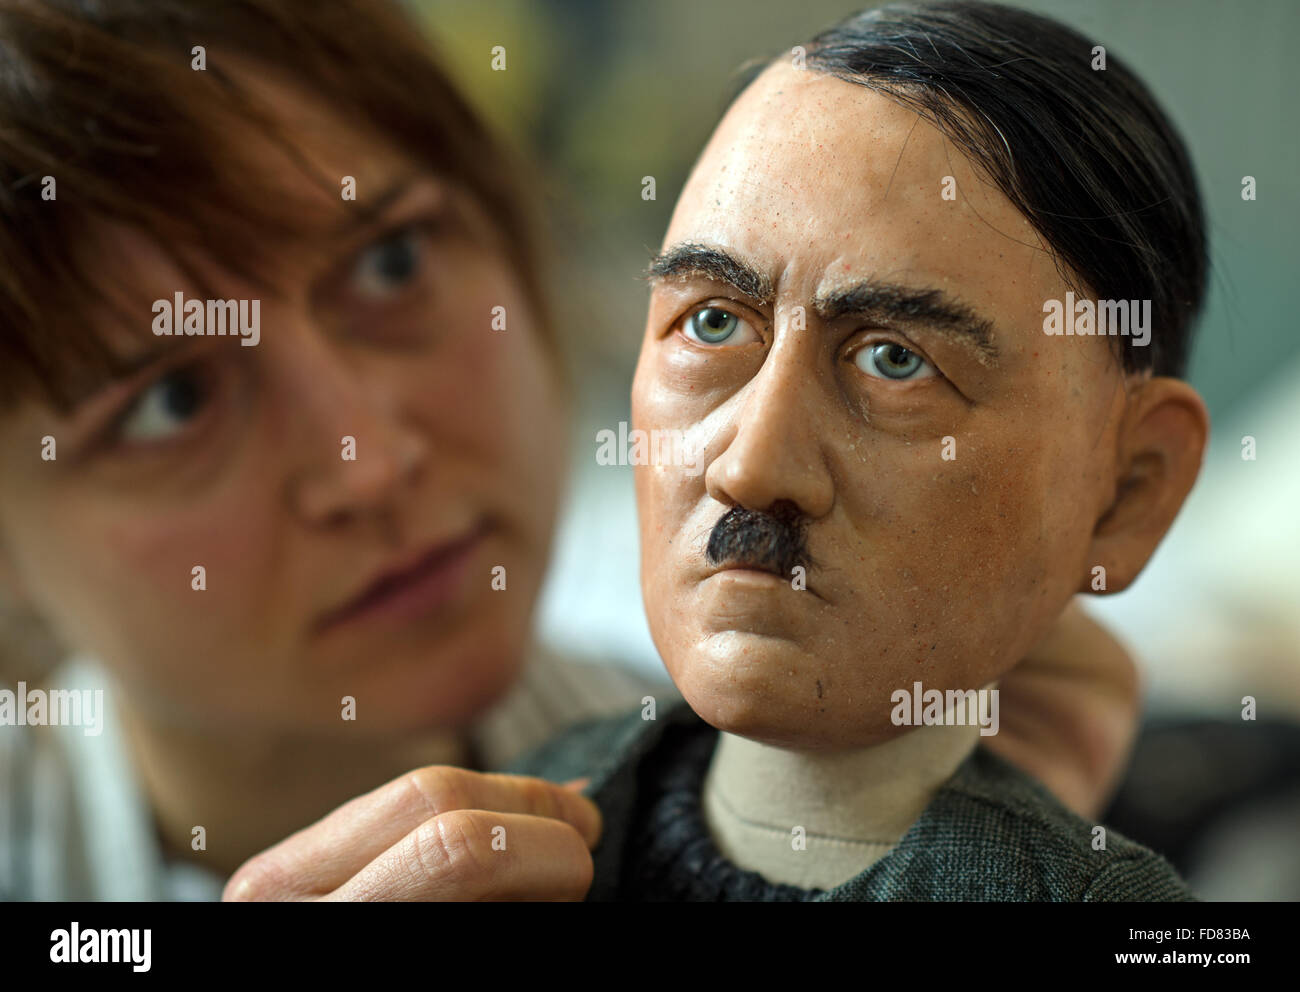 Louise Nowitzki prepares hand puppets for the performance '1913 - Der Sommer des Jahrhunderts' (lit. 1913 - the summer of the century) in a workshop of the puppet theatre in Halle/Saale, Germany, 19 January 2016. They include puppets of dictator Adolf Hitler. The puppet play premieres on 12 March 2016. PHOTO: HENDRIK SCHMIDT/DPA Stock Photo